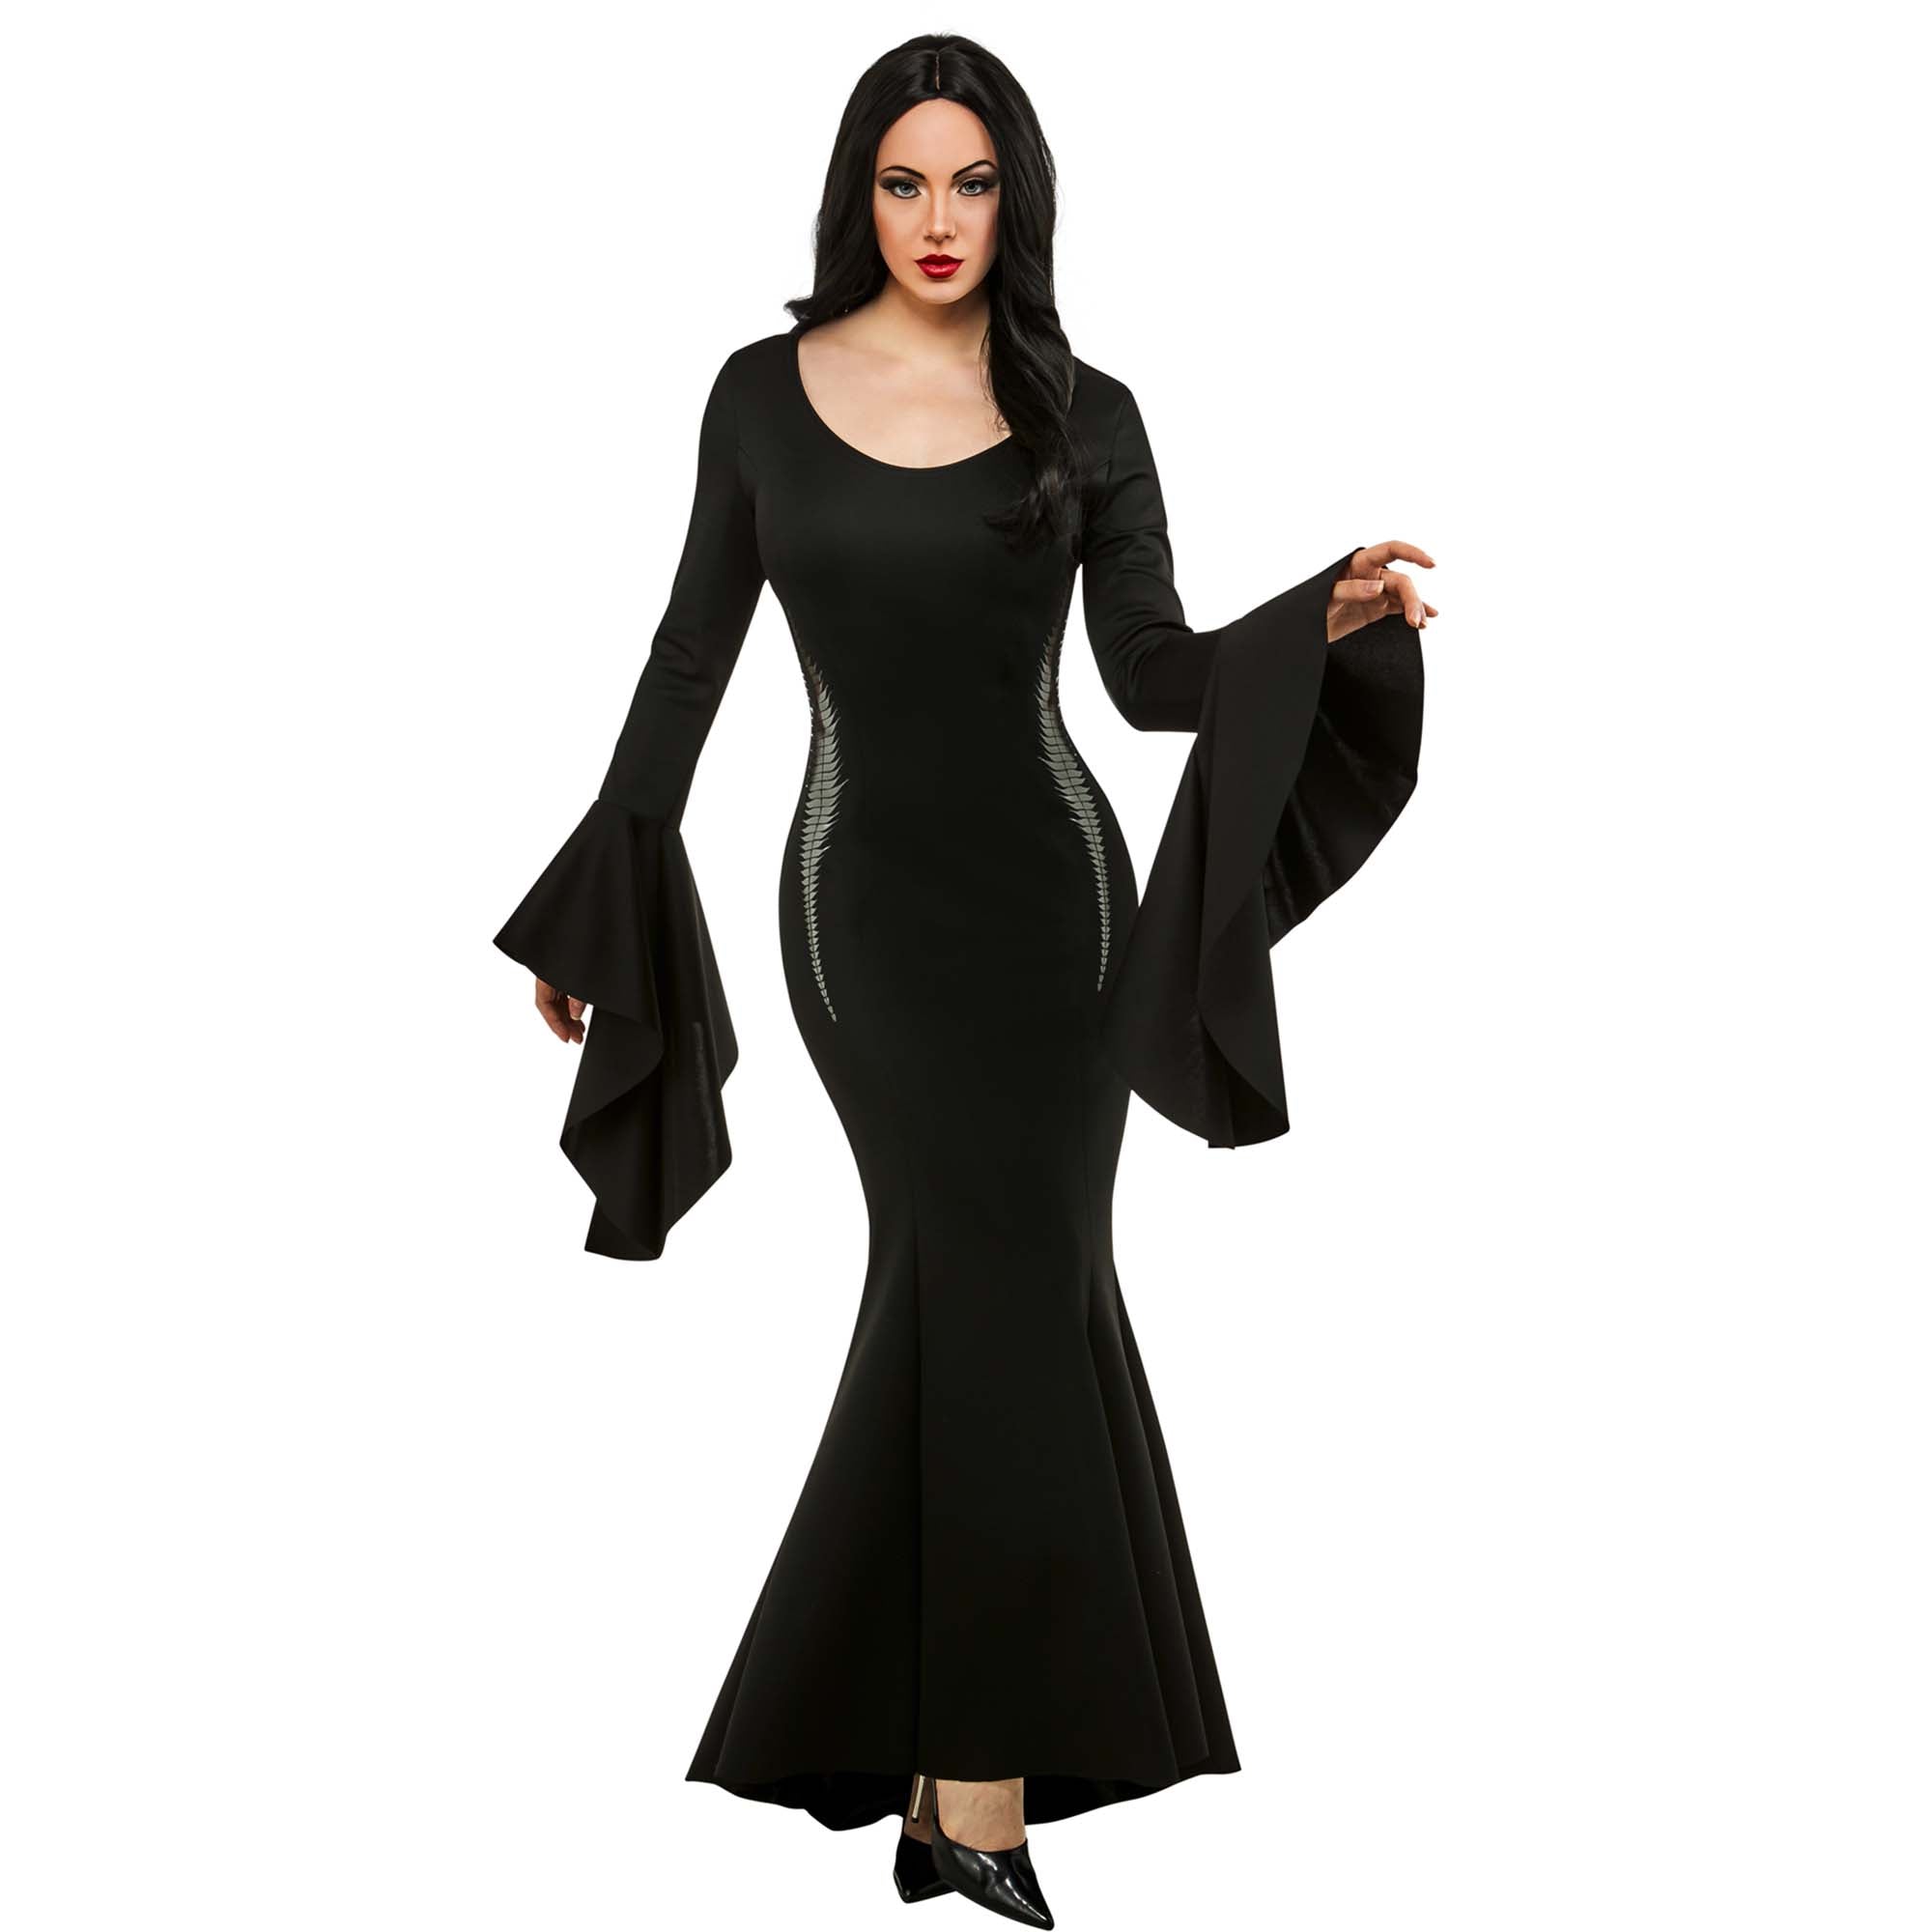 Wednesday Morticia Costume for Adults, Black Dress | Party Expert